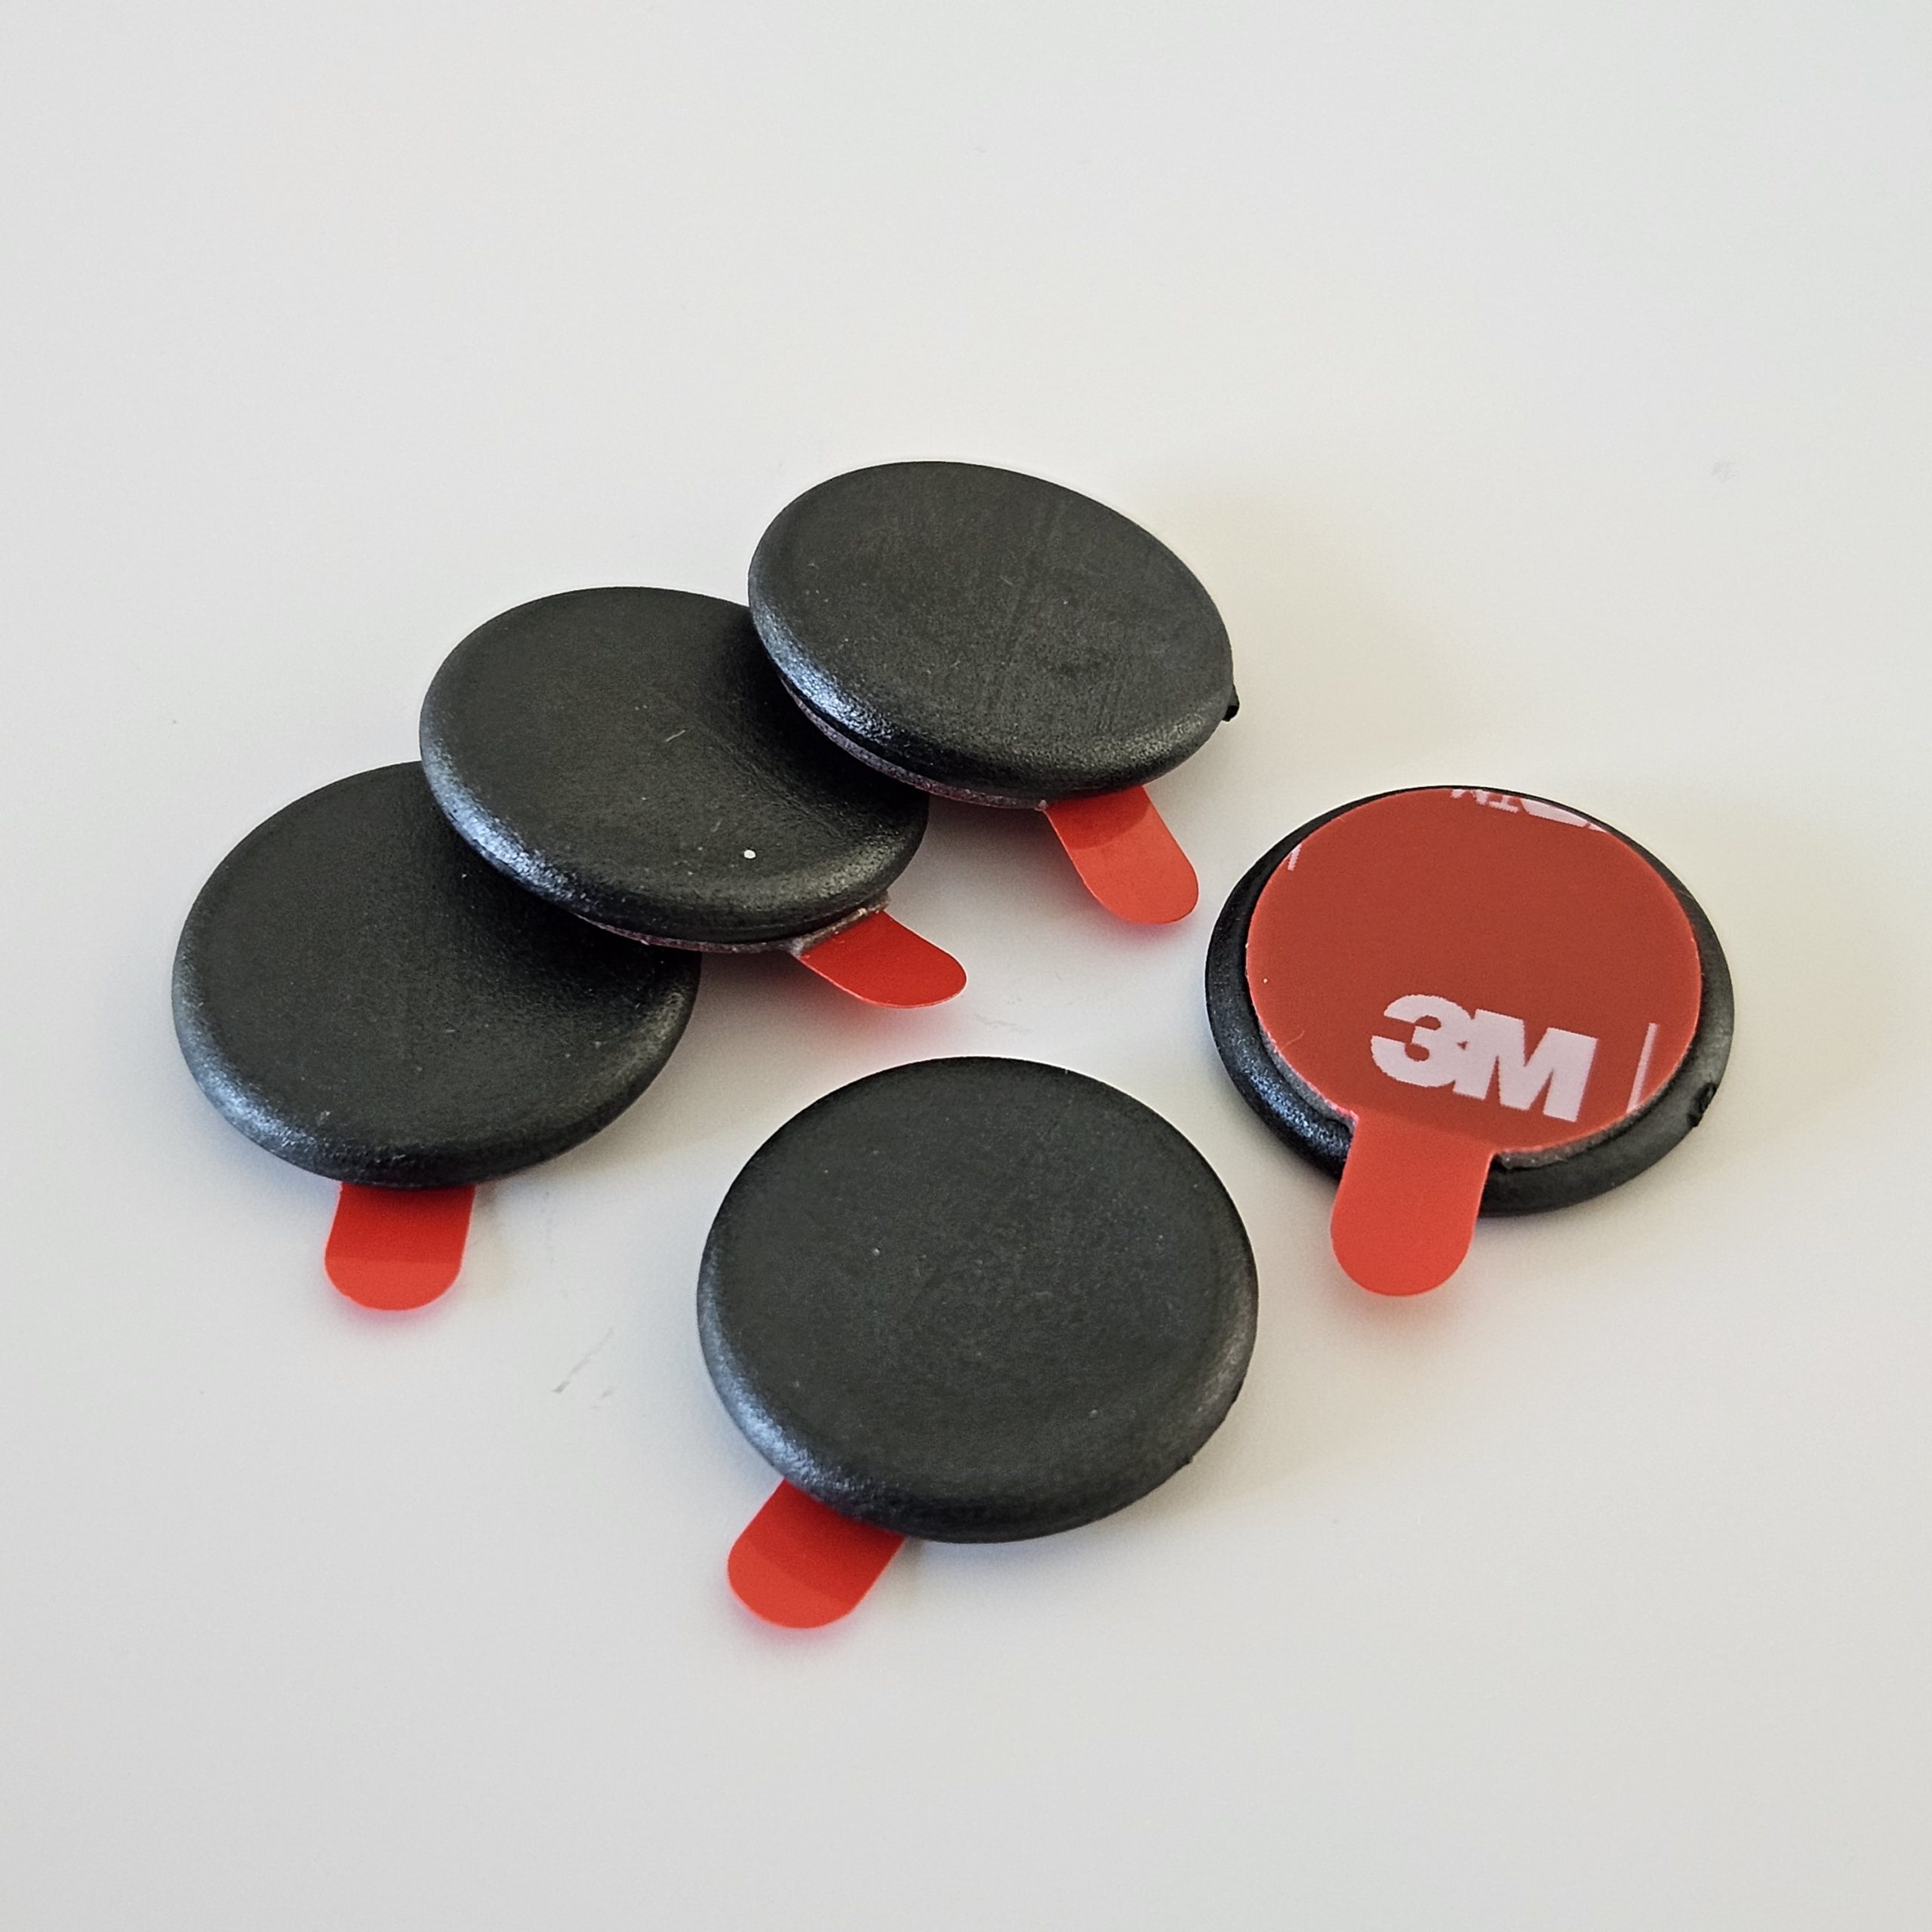 A group of NFC hard tags with 3M VHB adhesive and release liner with easy-pull tab.